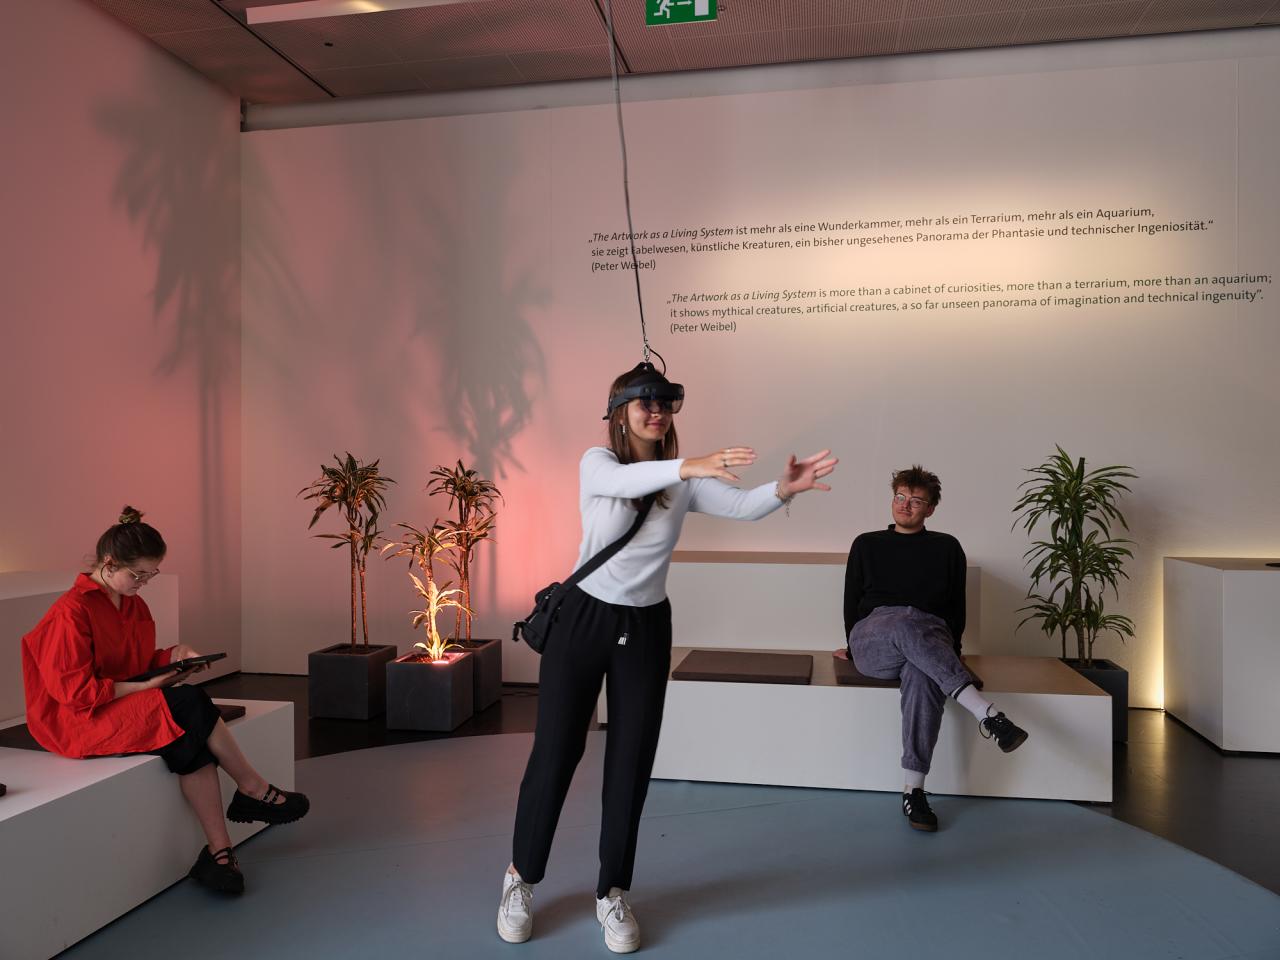 On display is the work "ARtchive". The picture shows three people, two sitting on the sofas and one person standing in the middle with VR glasses on and interacting with something that only she can see.